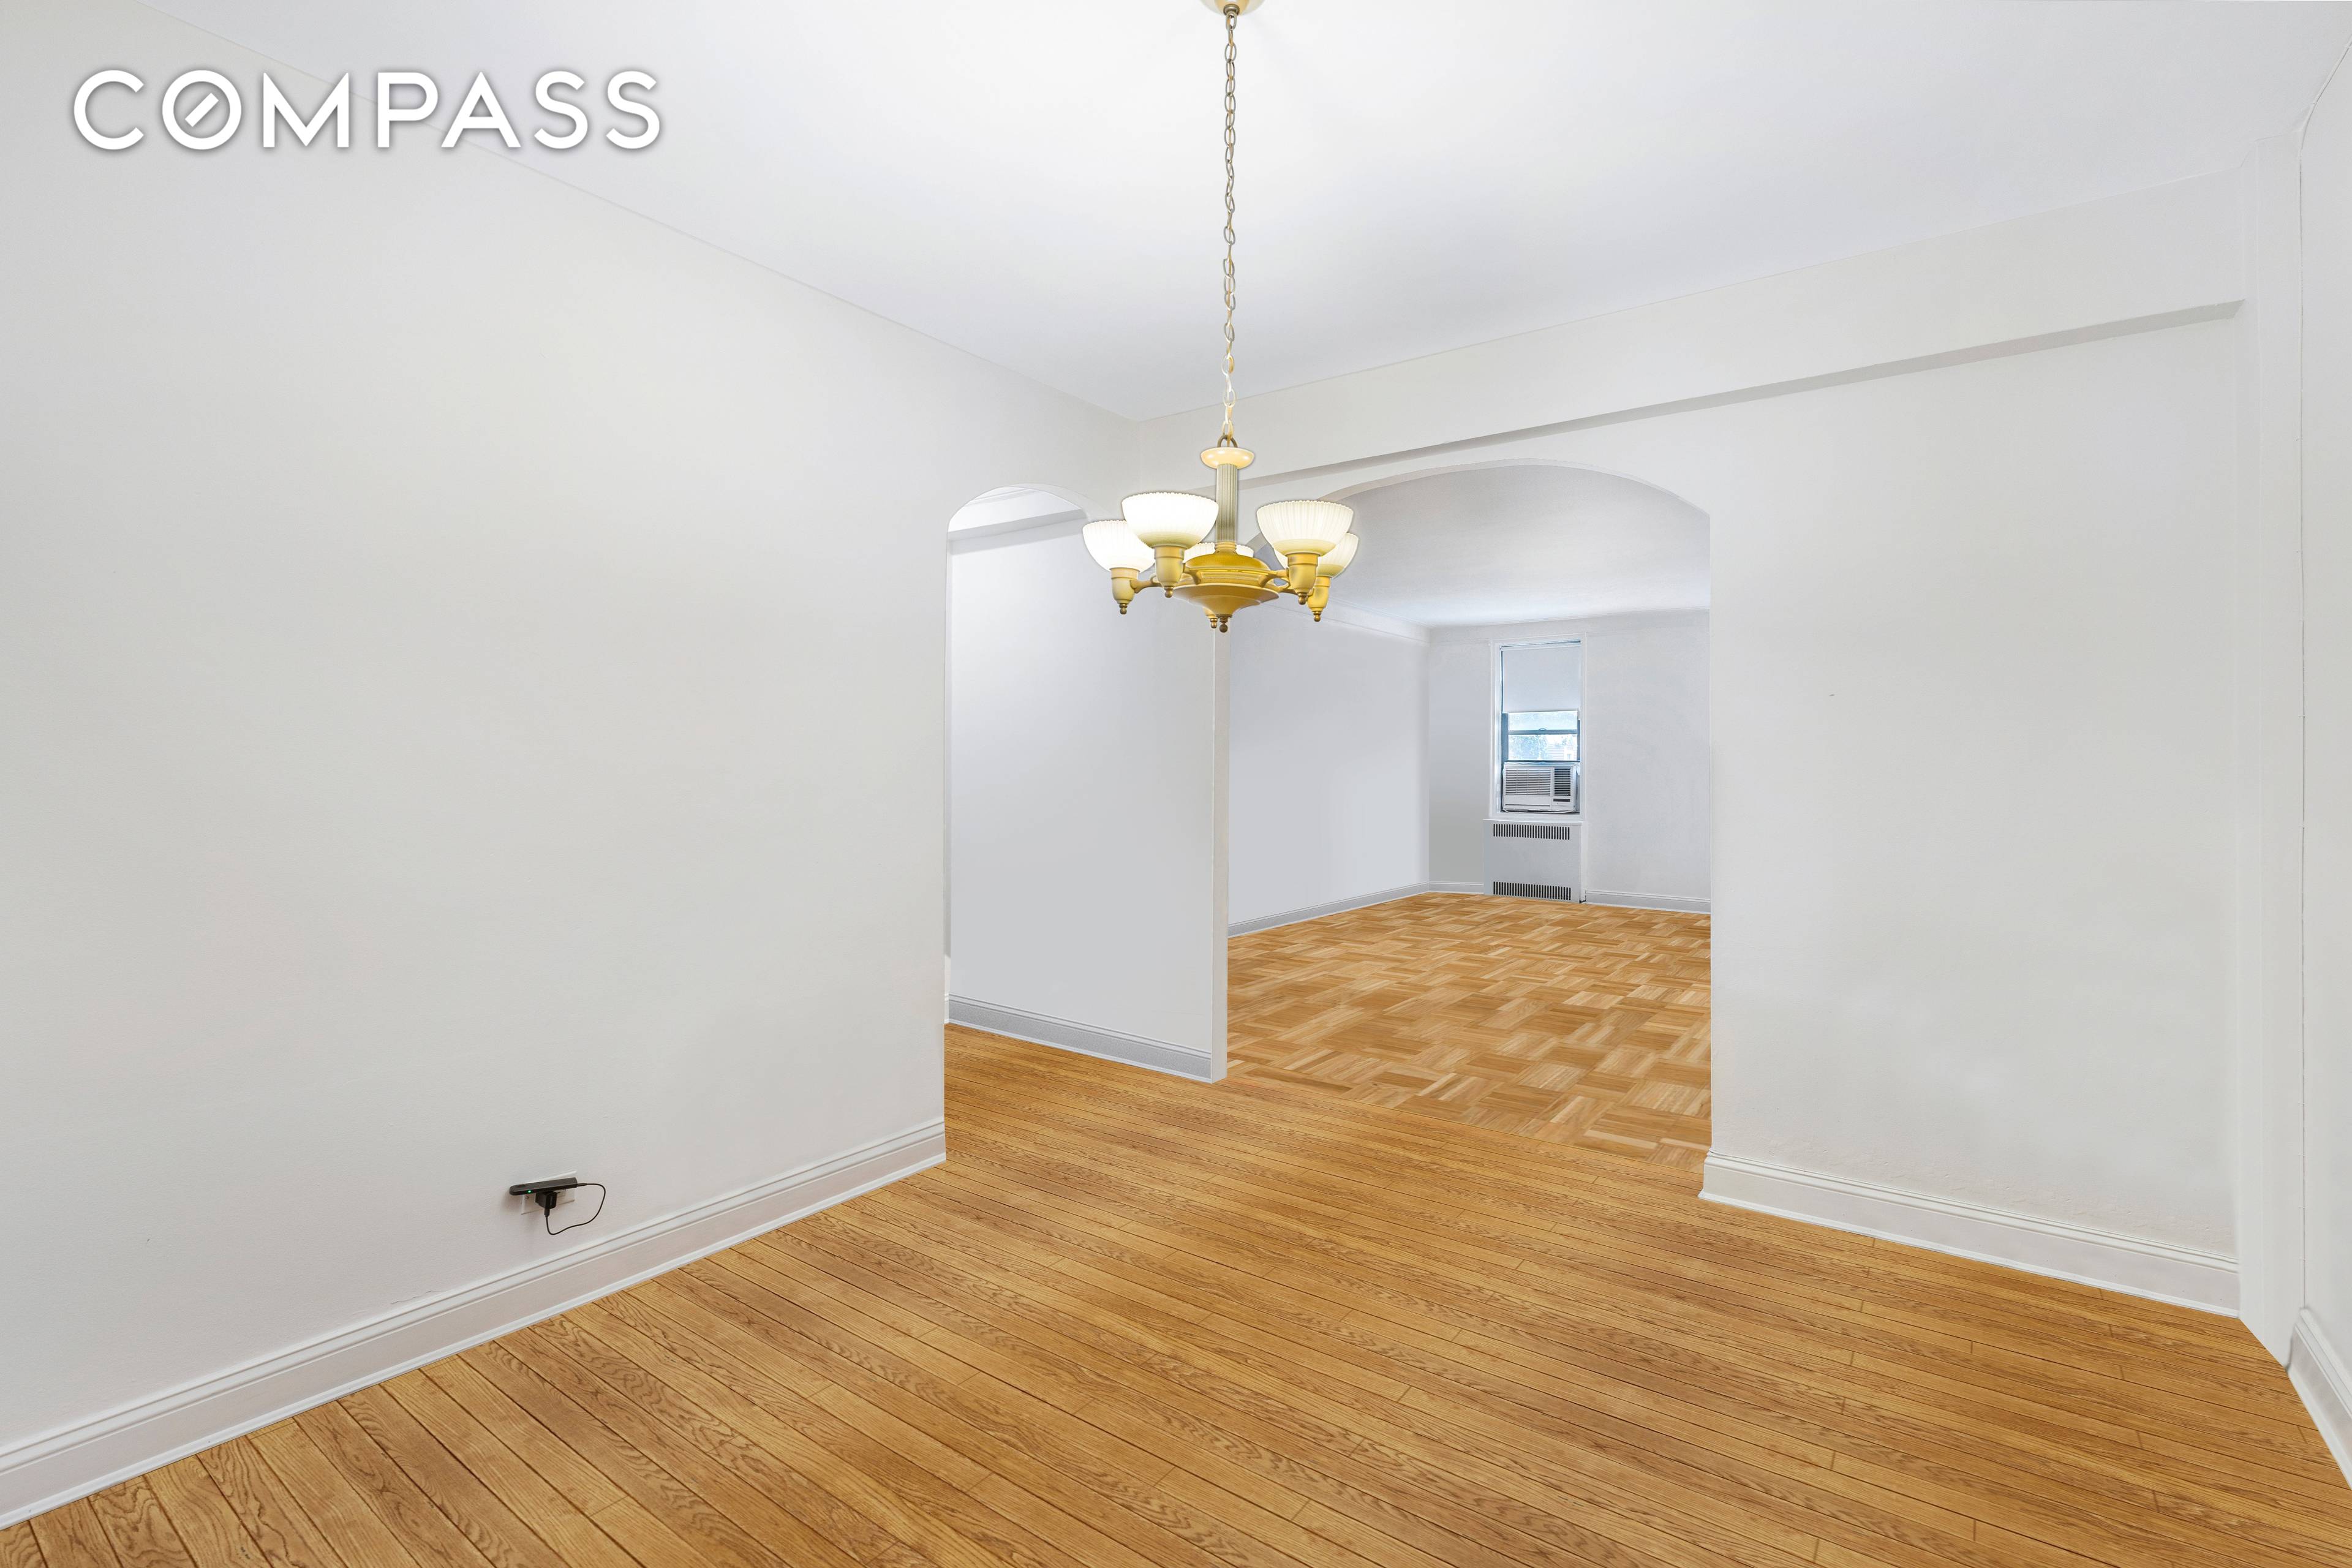 This sprawling Art Deco inspired co op features three bedrooms and two baths.